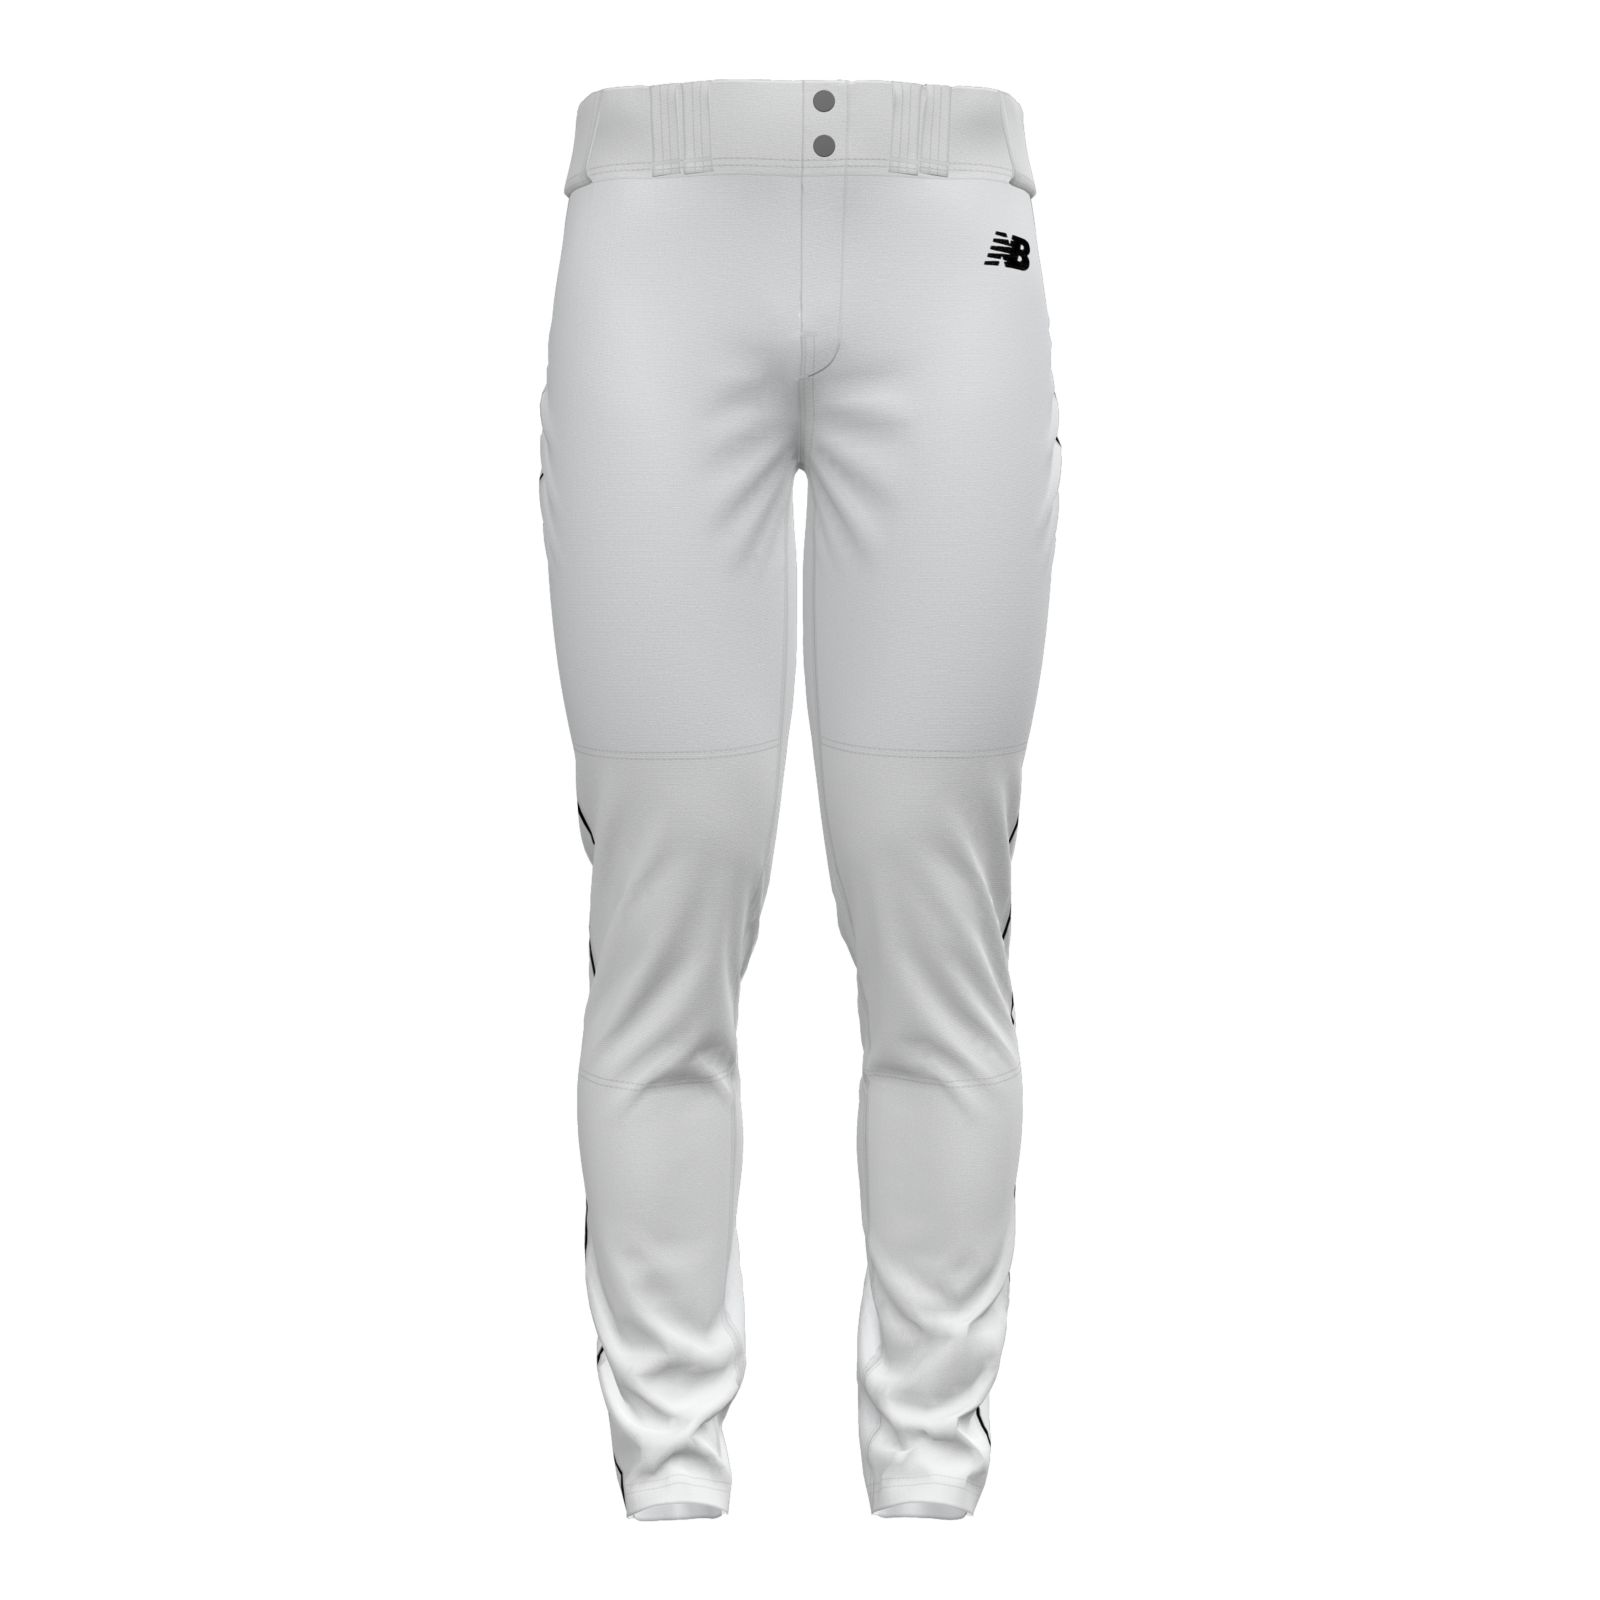 Baseball Players Are Sporting Tighter Pant These Days, And for Good Reasons!